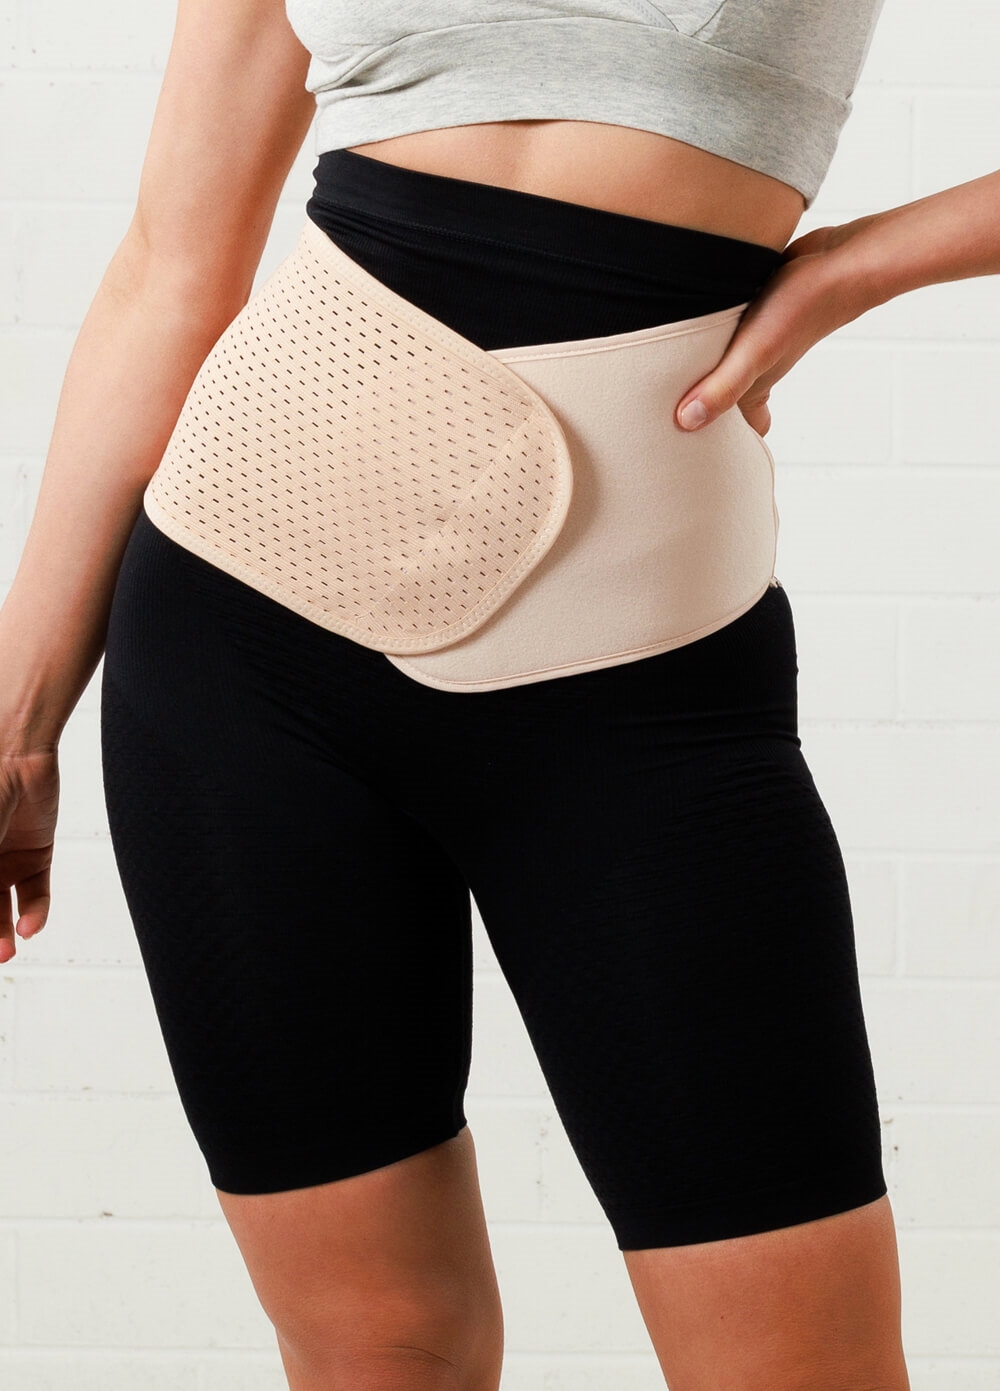 Queen Bee - Cooling Perforated Post-Pregnancy Belly Wrap